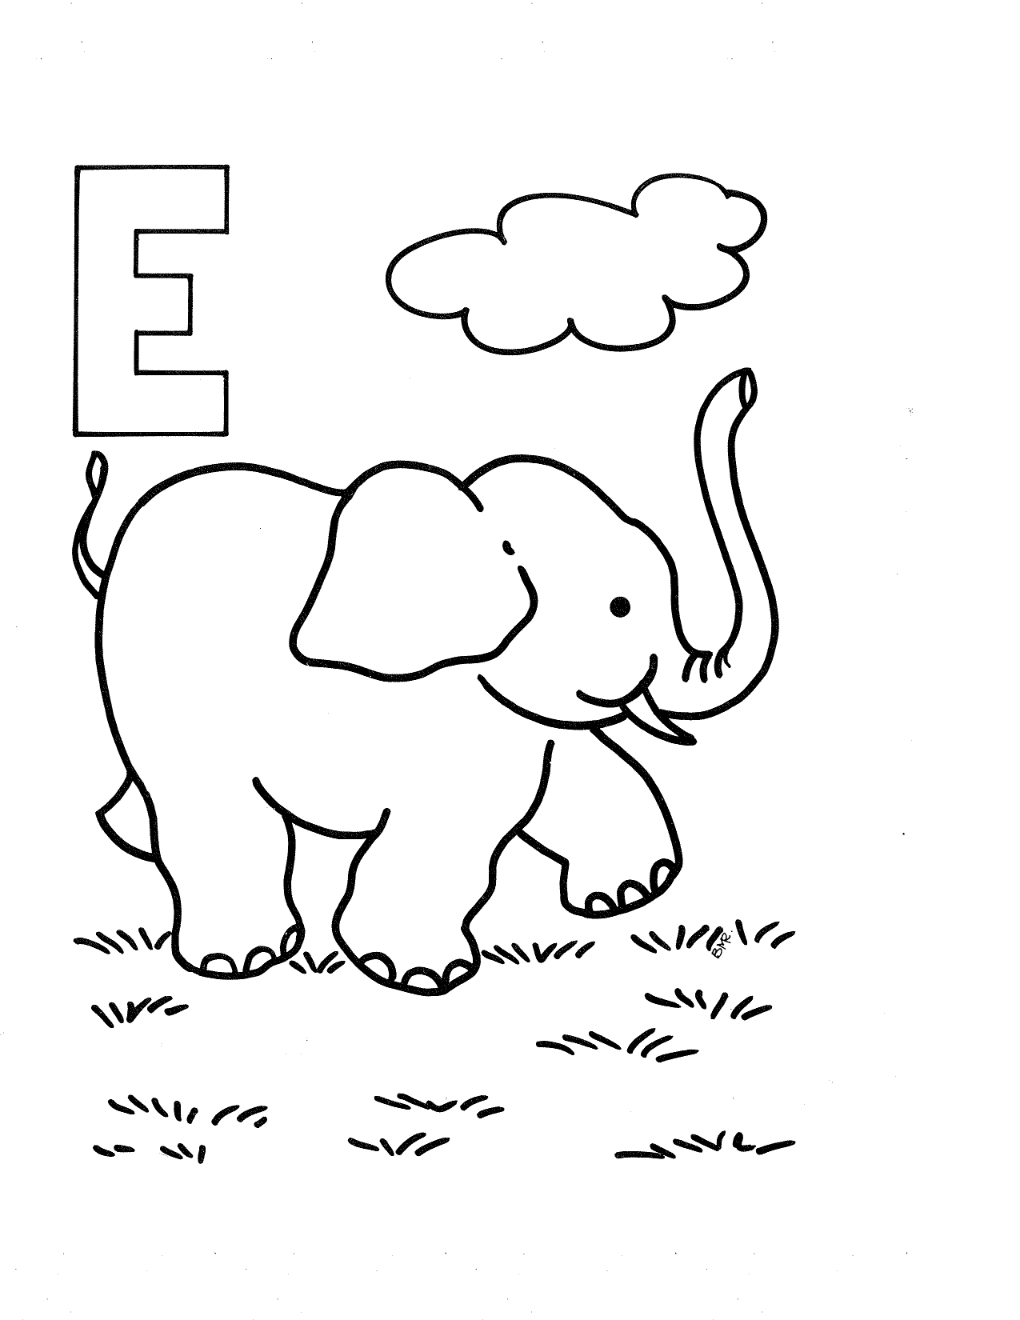 Letter E coloring page and printable free ELEFANTE | Kids Pages ...